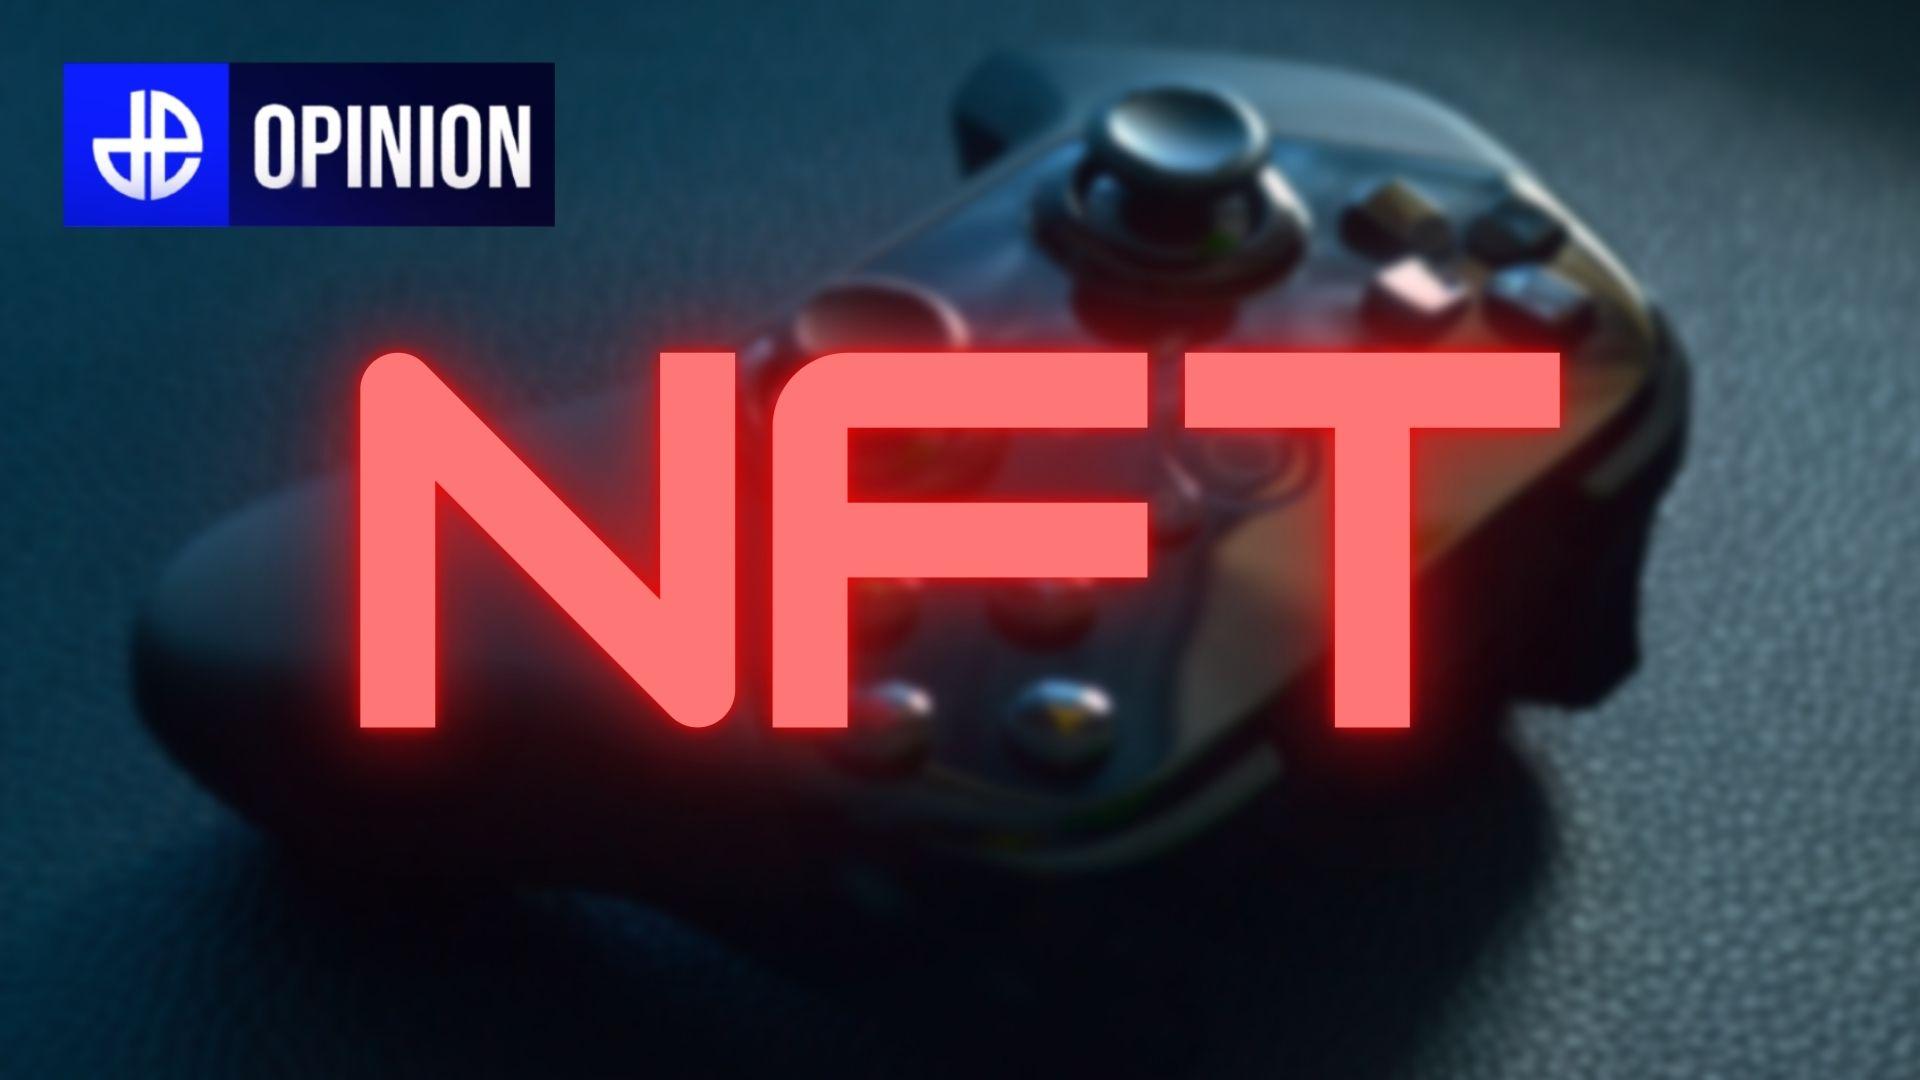 How To Use A Controller In Big Time NFT Game 